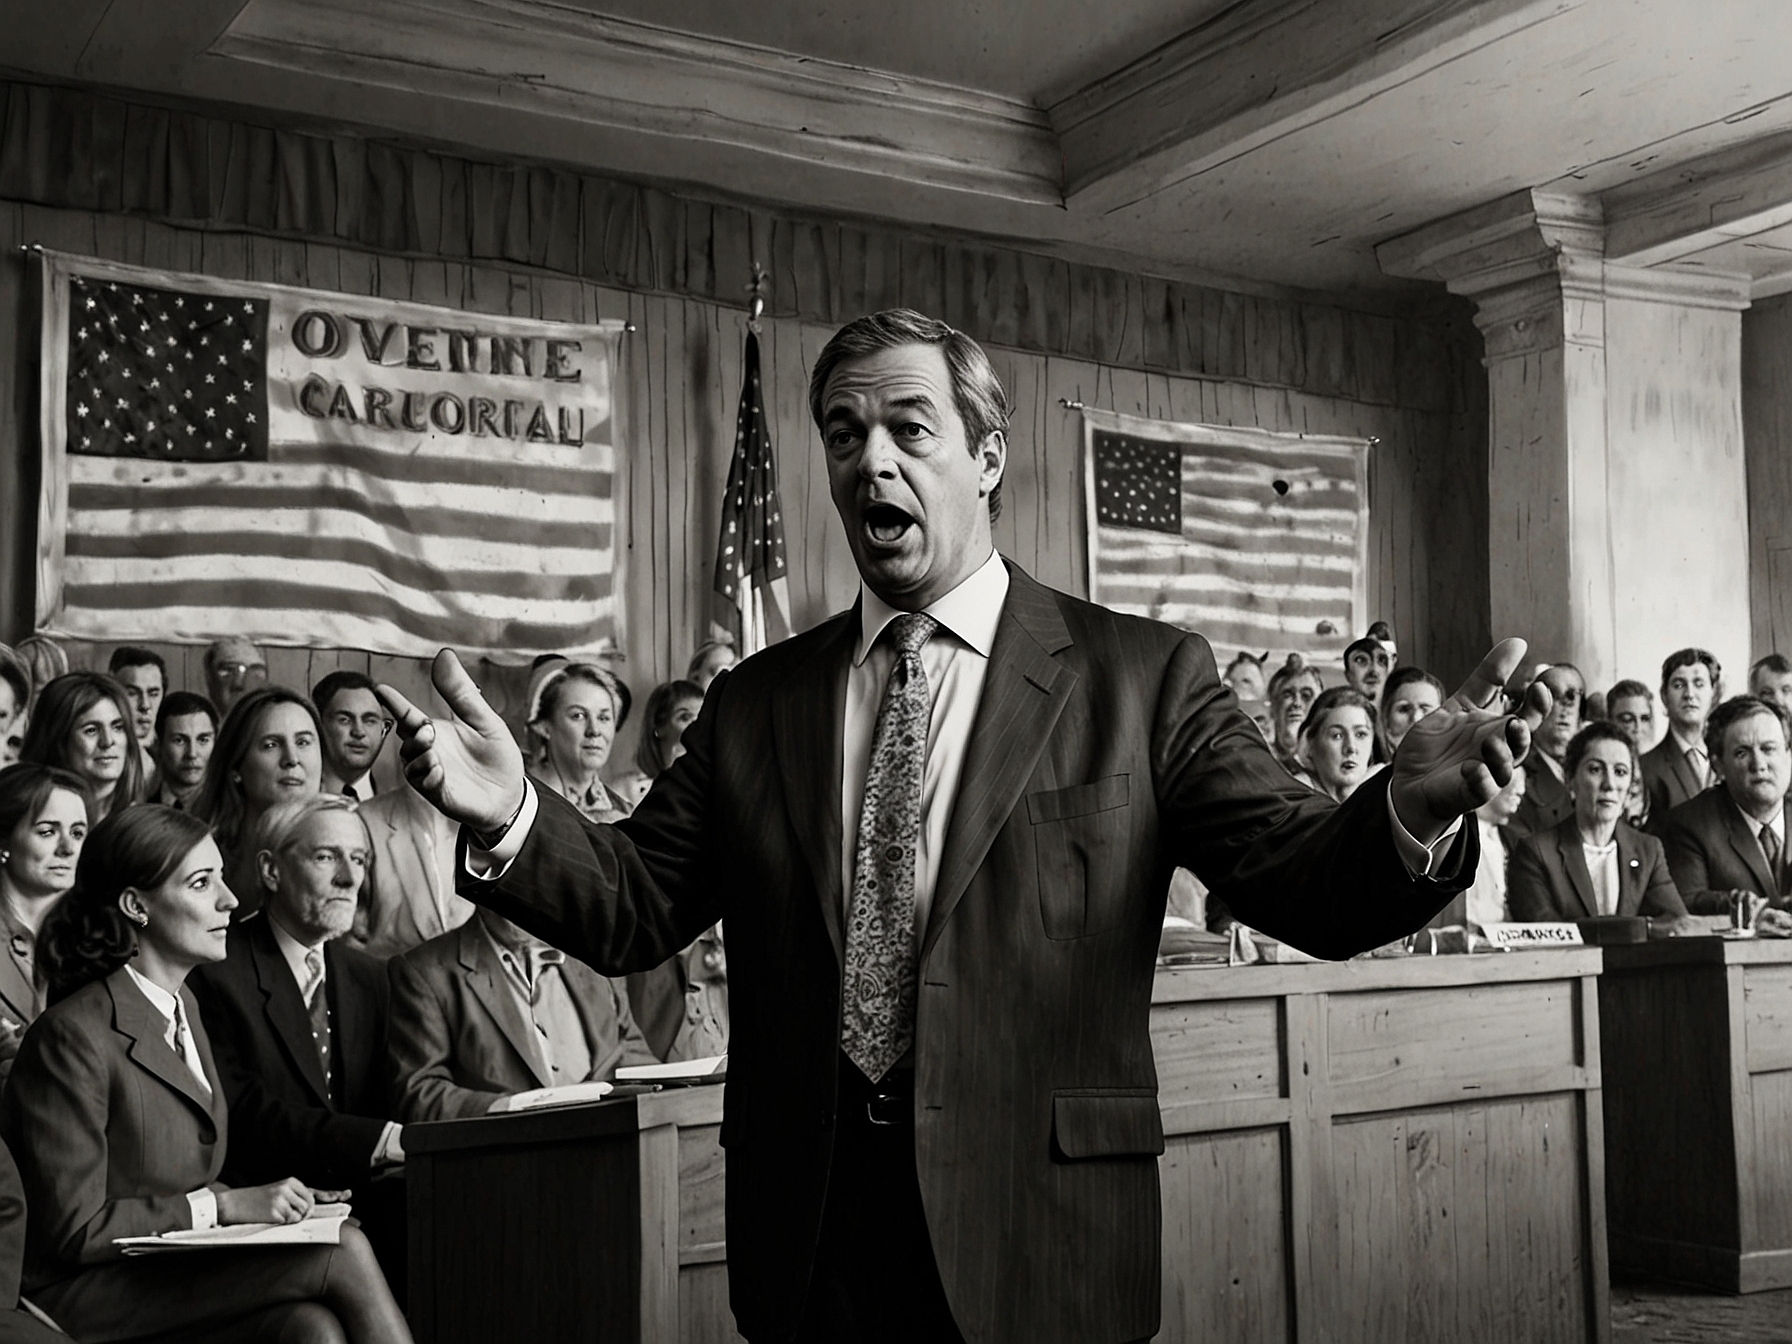 Nigel Farage speaking at a political event, emphasizing his controversial comments on the 2020 US Presidential Election and his stance on ballot harvesting practices.